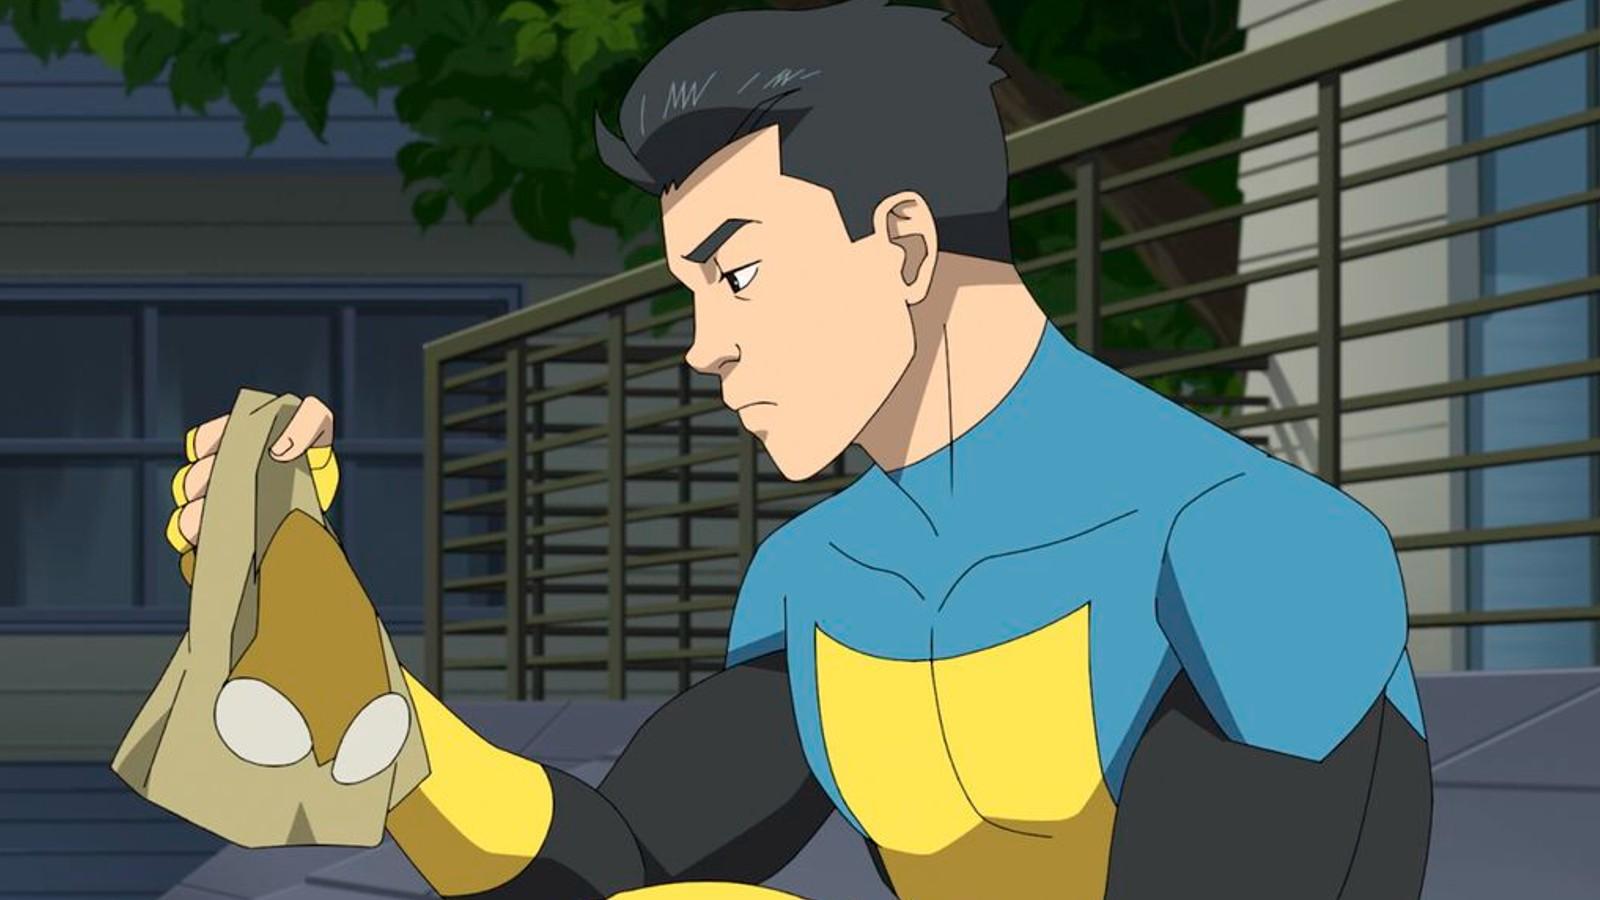 Invincible season 2 release date and time — how to watch online right now